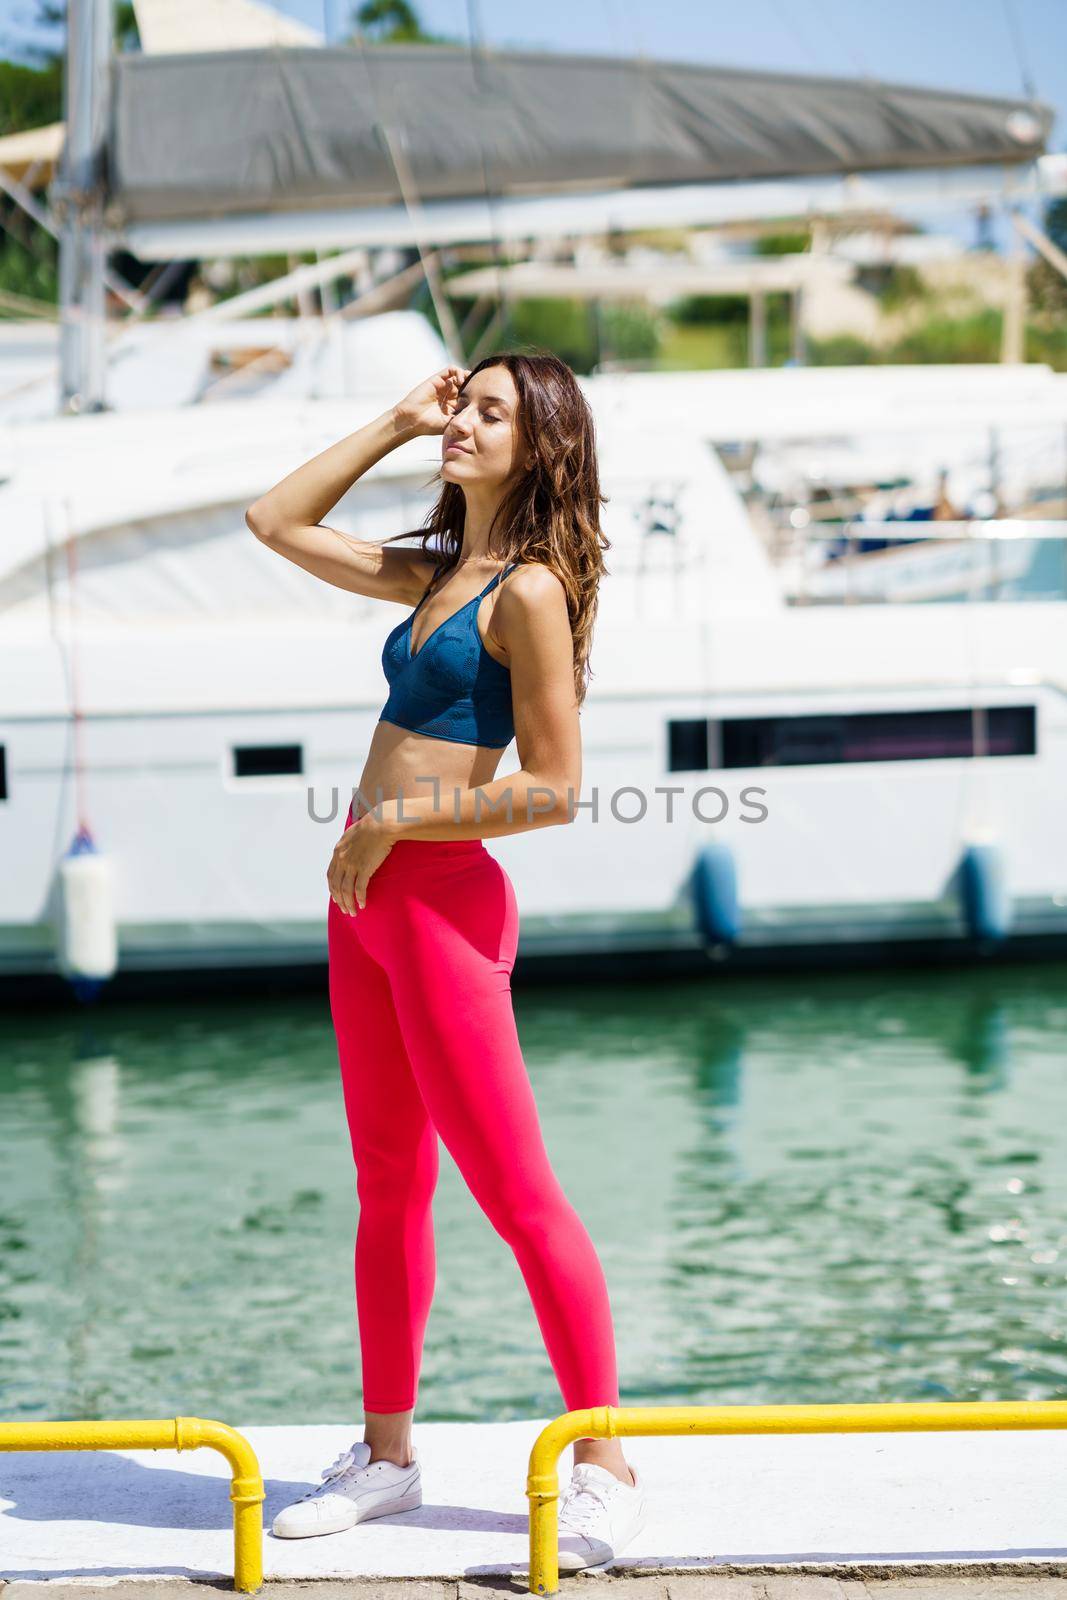 Fitness girl, model of fashion, in red sportswear outfit posing on waterfront harbour.